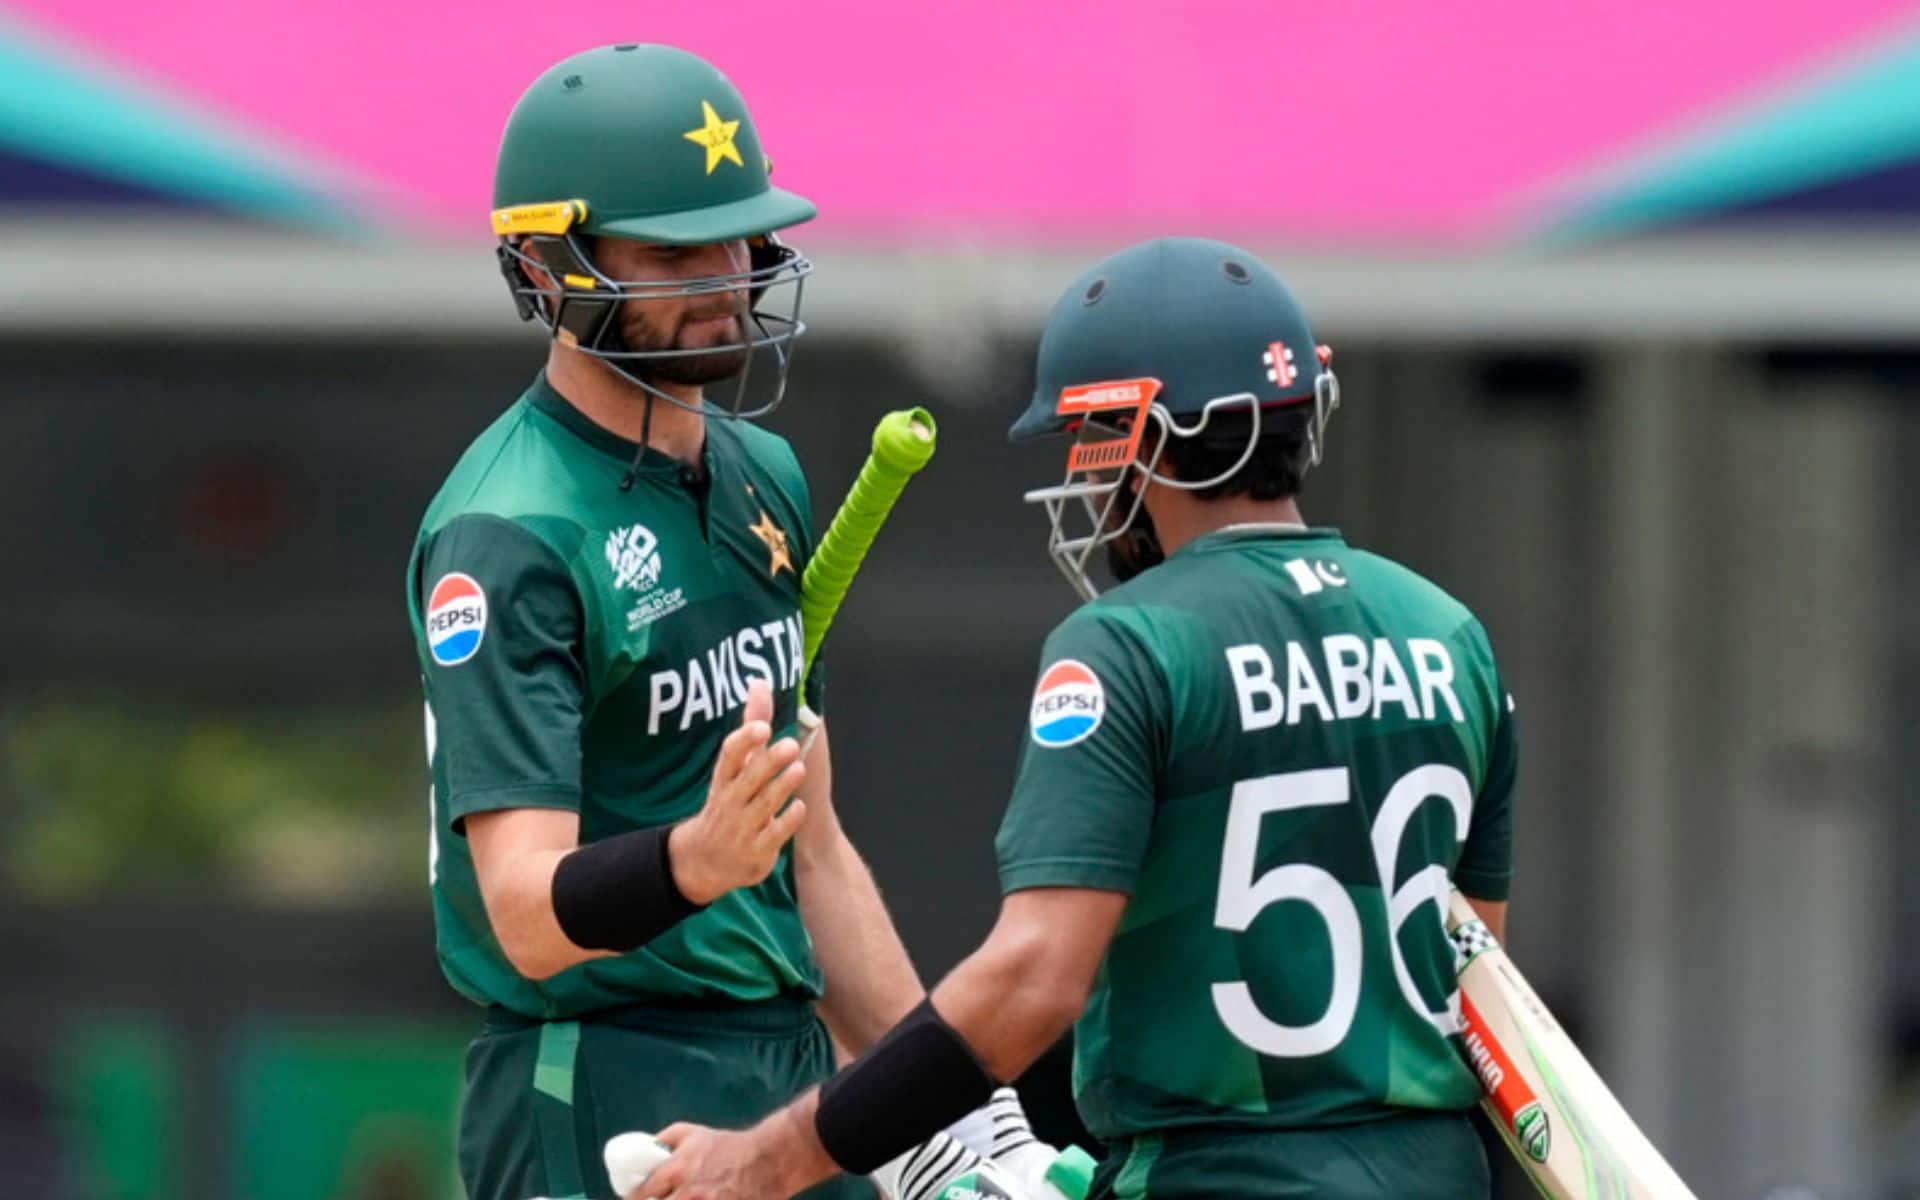 Babar Azam, Shaheen & Rizwan To Be Rested For The Upcoming Test Series Vs BAN - Reports